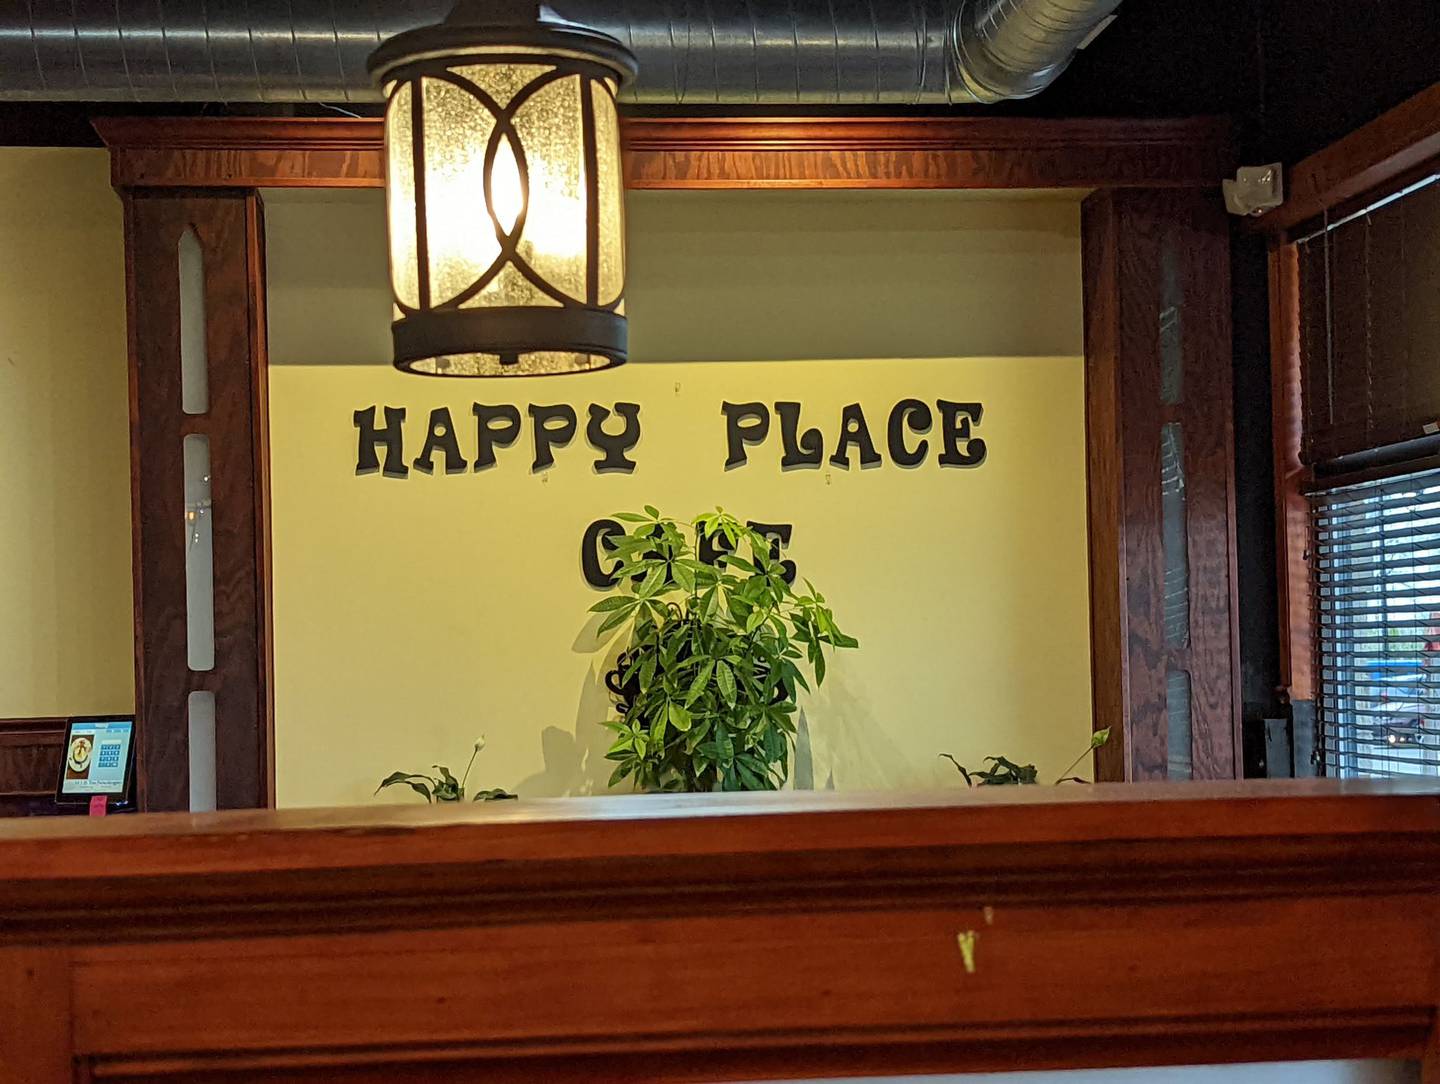 The Happy Place Cafe website says it offers “a careful balance of excellent food, fast, courteous, and efficient service, and a clean, attractive, and unique family atmosphere.”